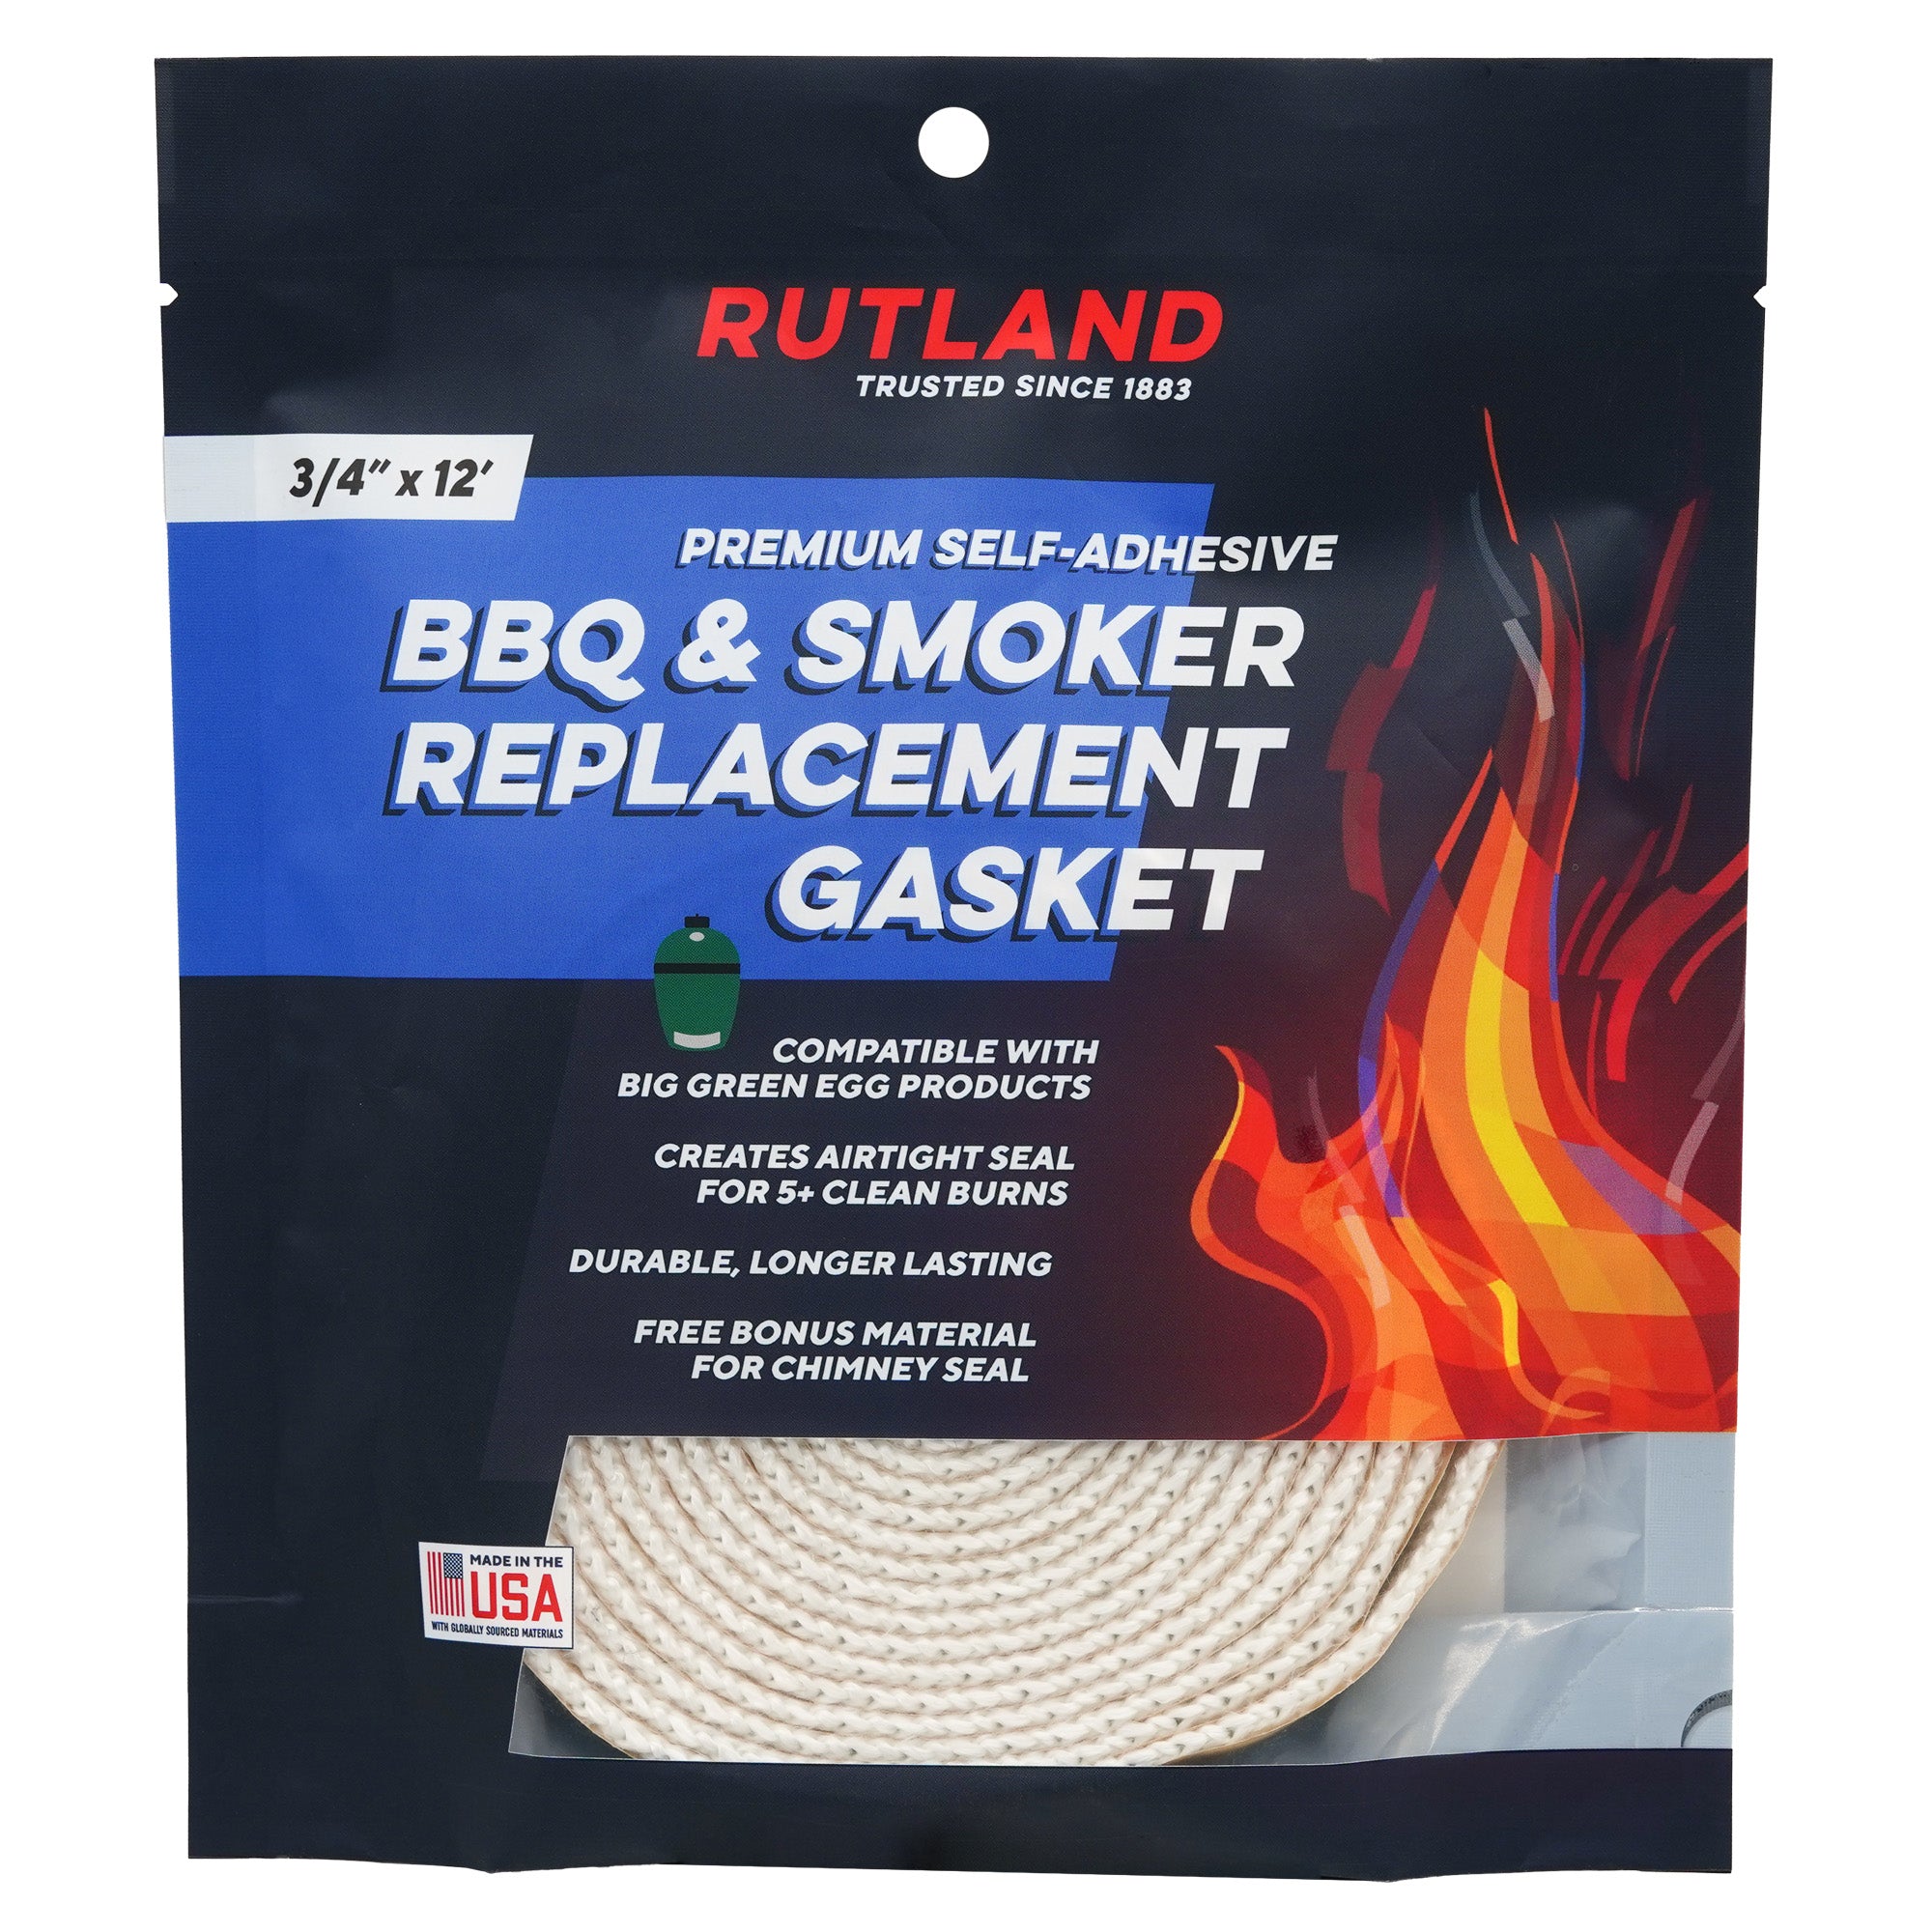 Ceramic Grill Replacement Gasket Rutland